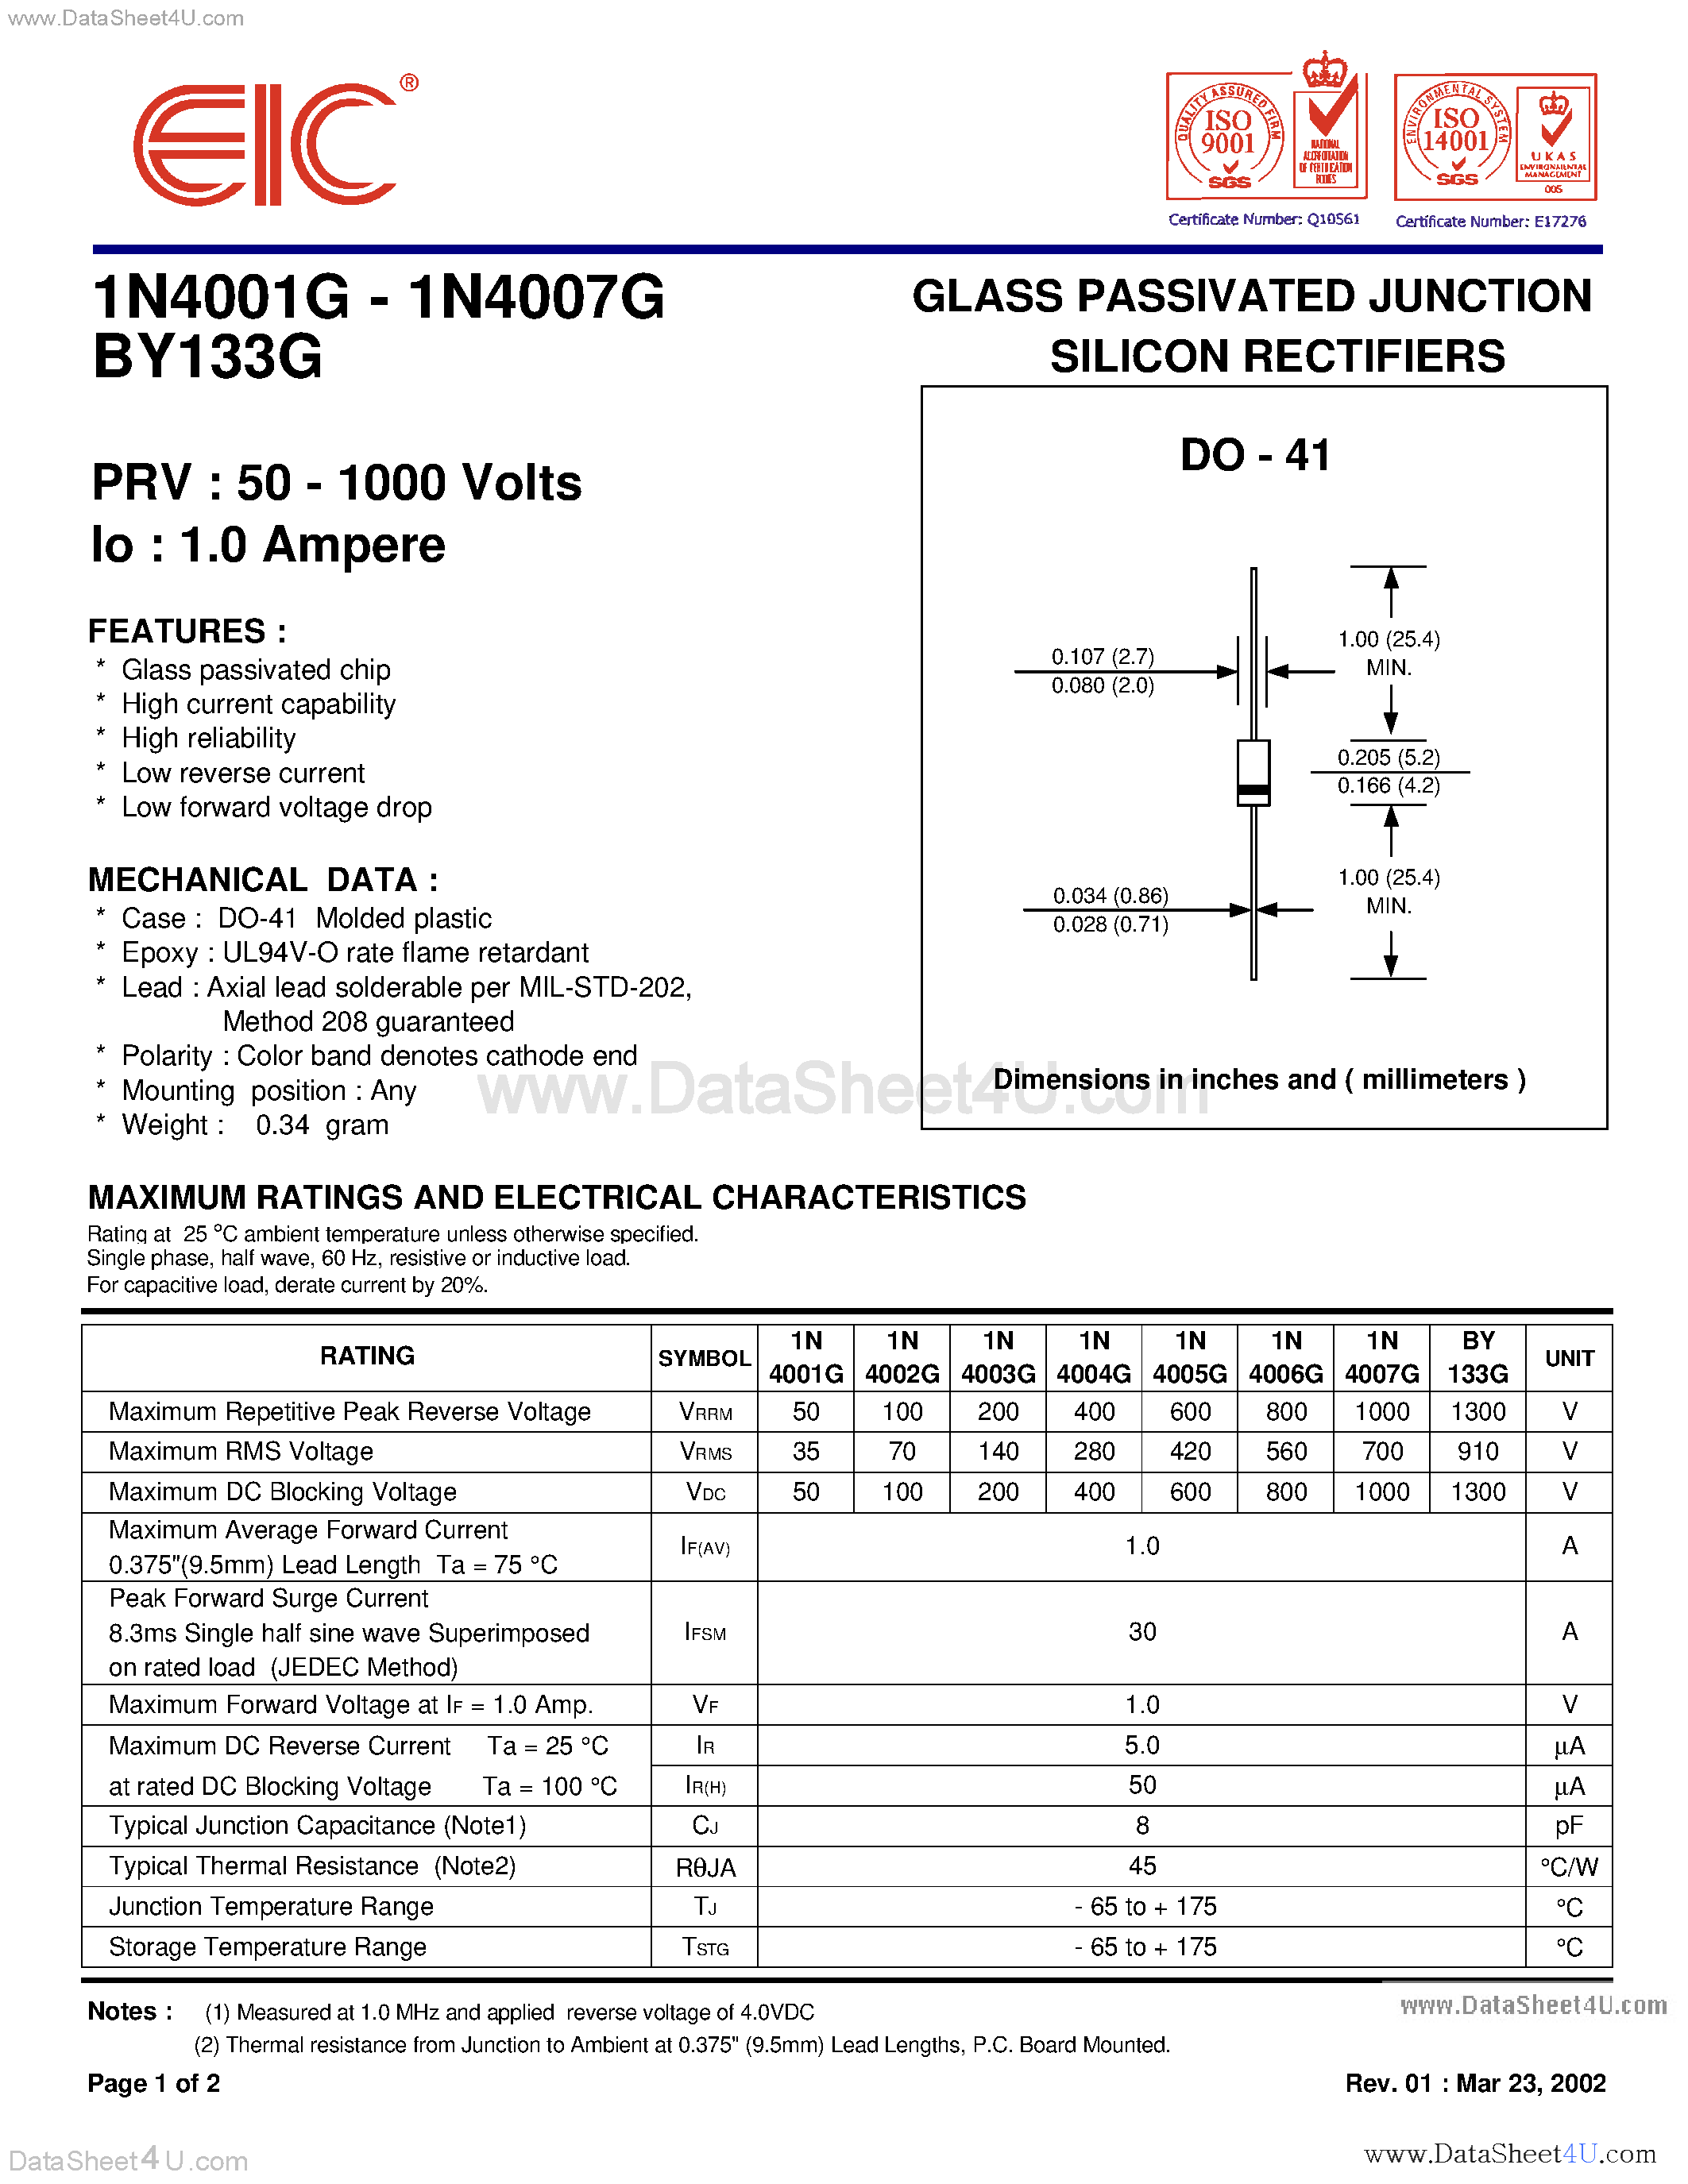 Даташит 1N4001G - (1N4001G - 1N4007G) Glass Passivated Junction Silicon Rectifiers страница 1